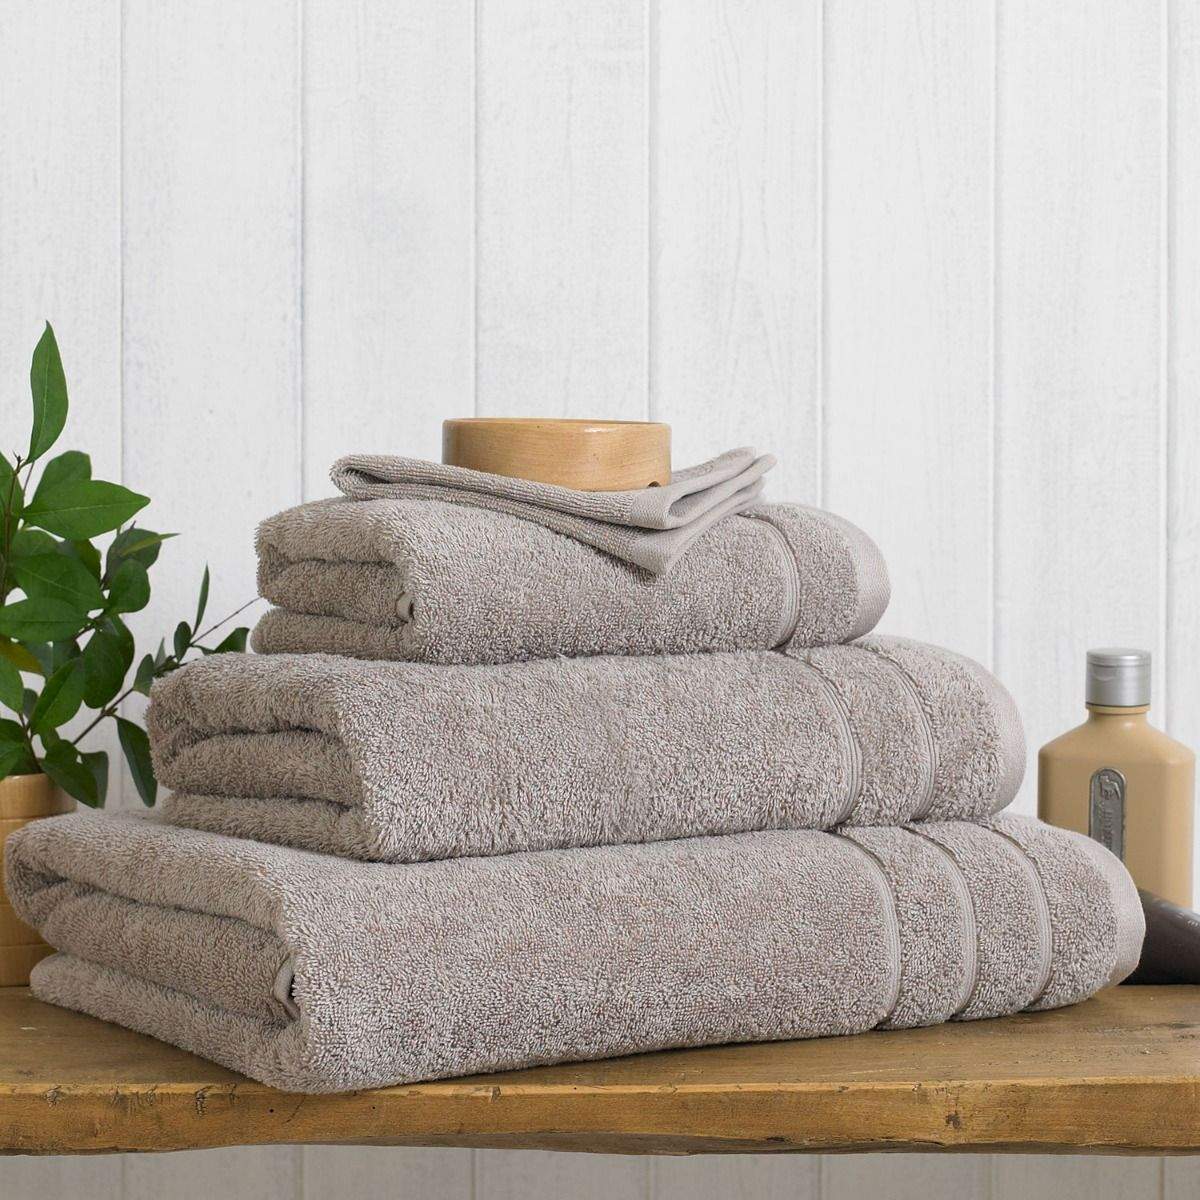 Cotton Towels For Spa